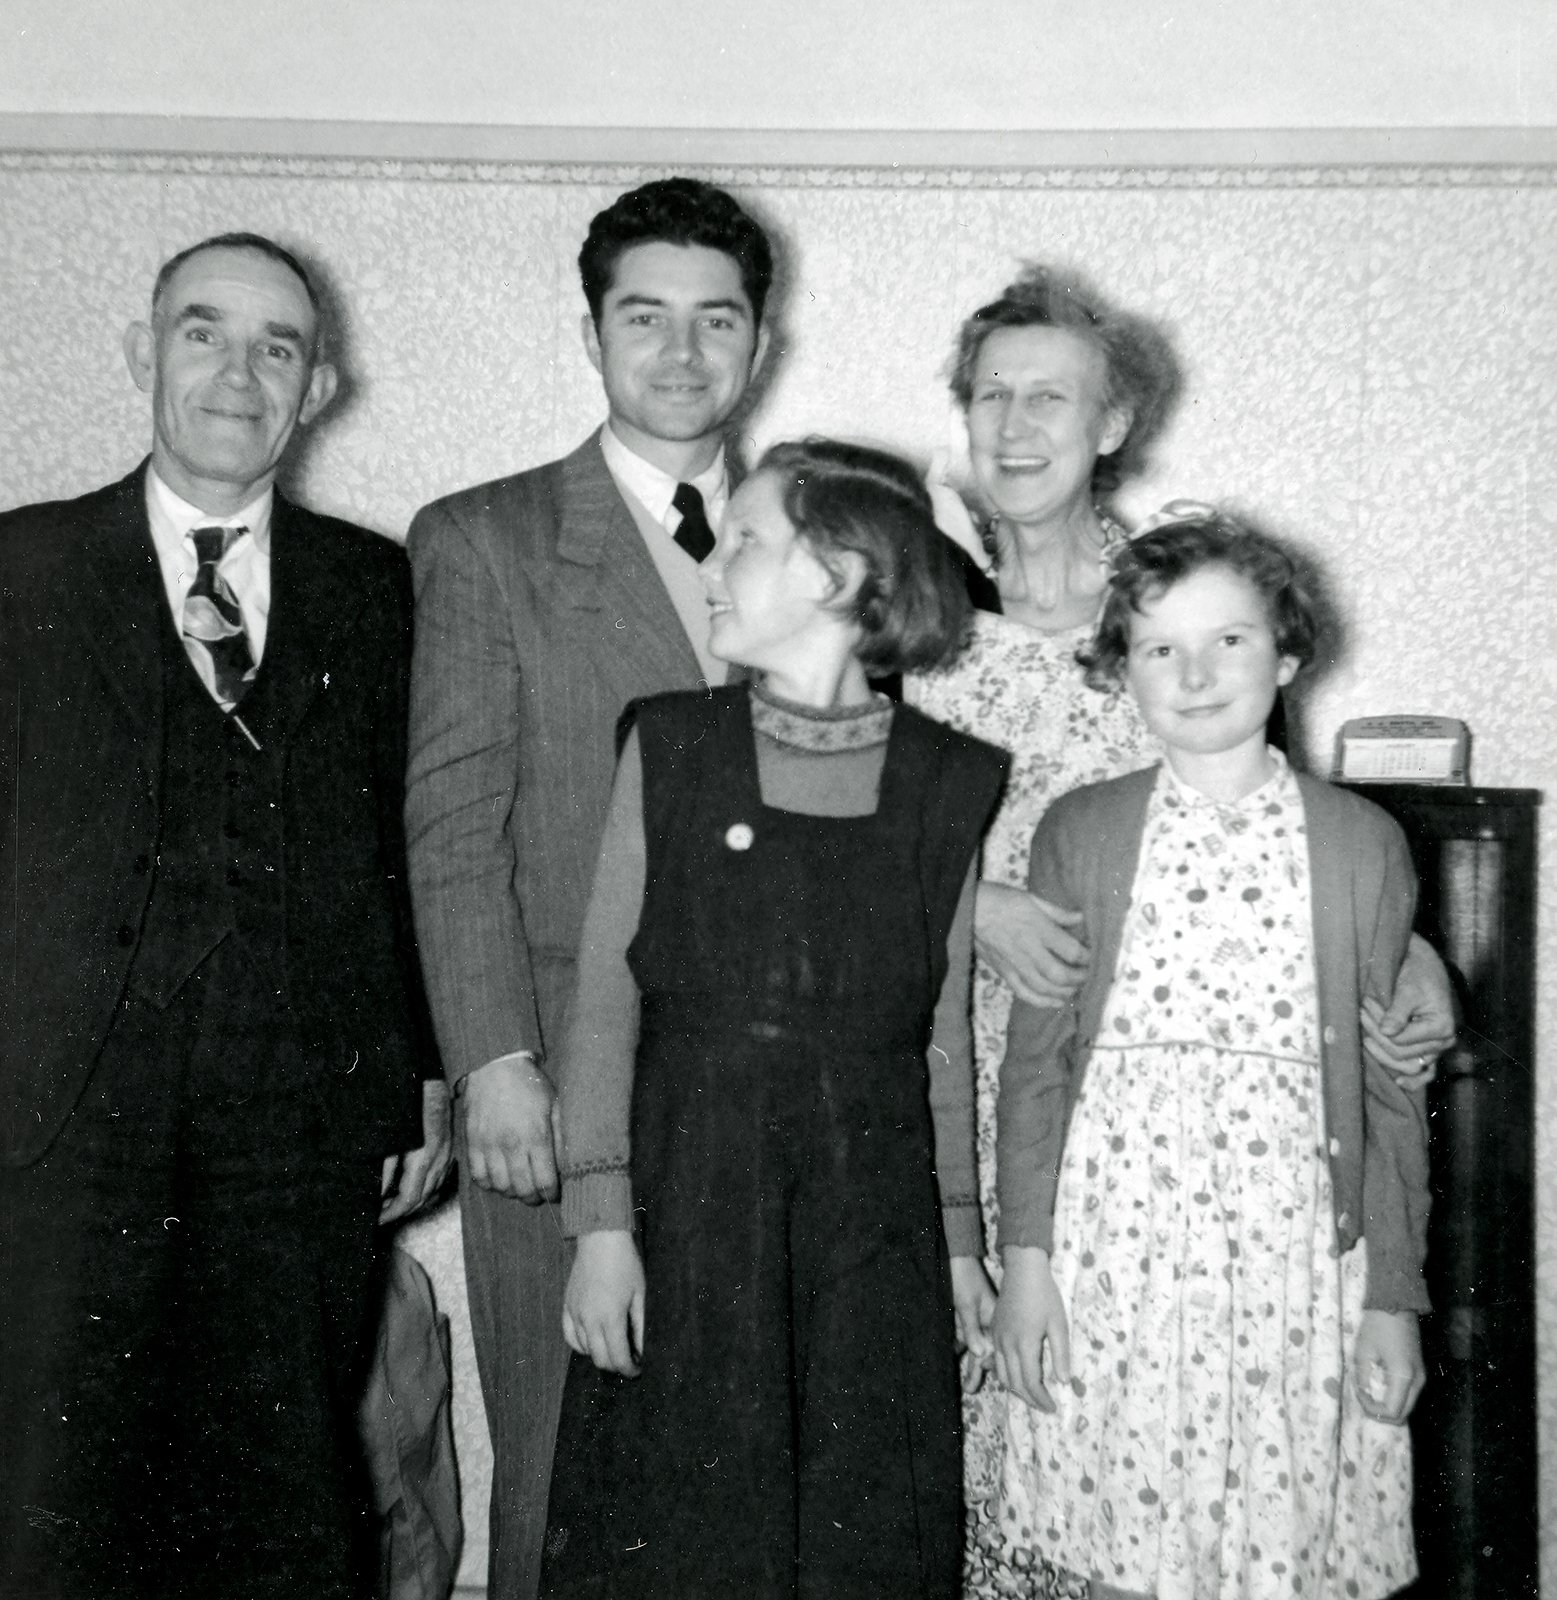 Beth’s father Patrick McNally with some of the McAtasney family, Lurgan, Northern Ireland, July 1954.